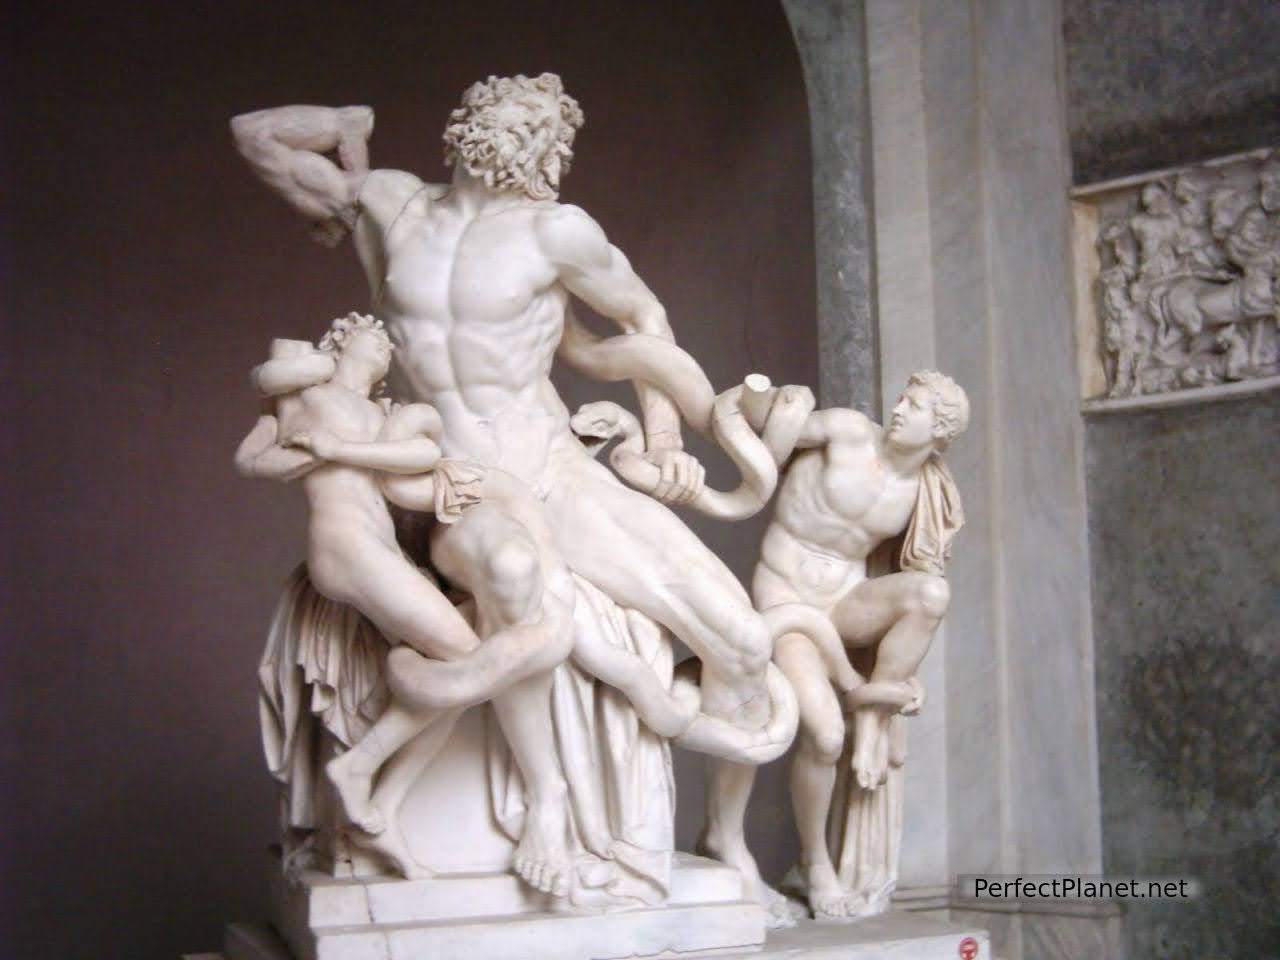 Laocoön and his sons